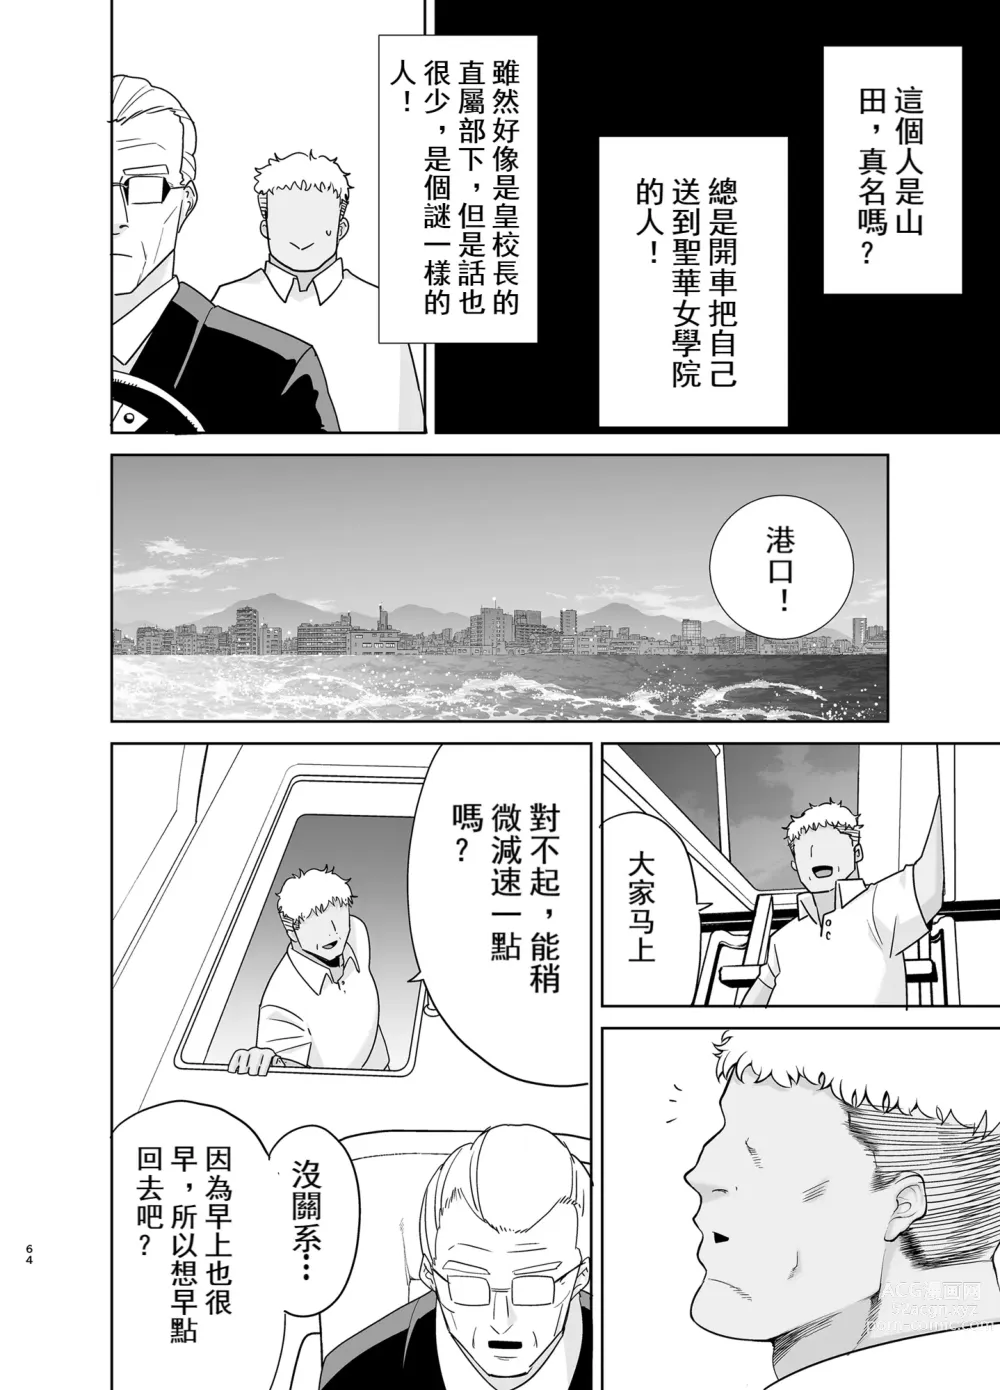 Page 269 of doujinshi 聖華女学院高等部公認竿おじさん 1-6